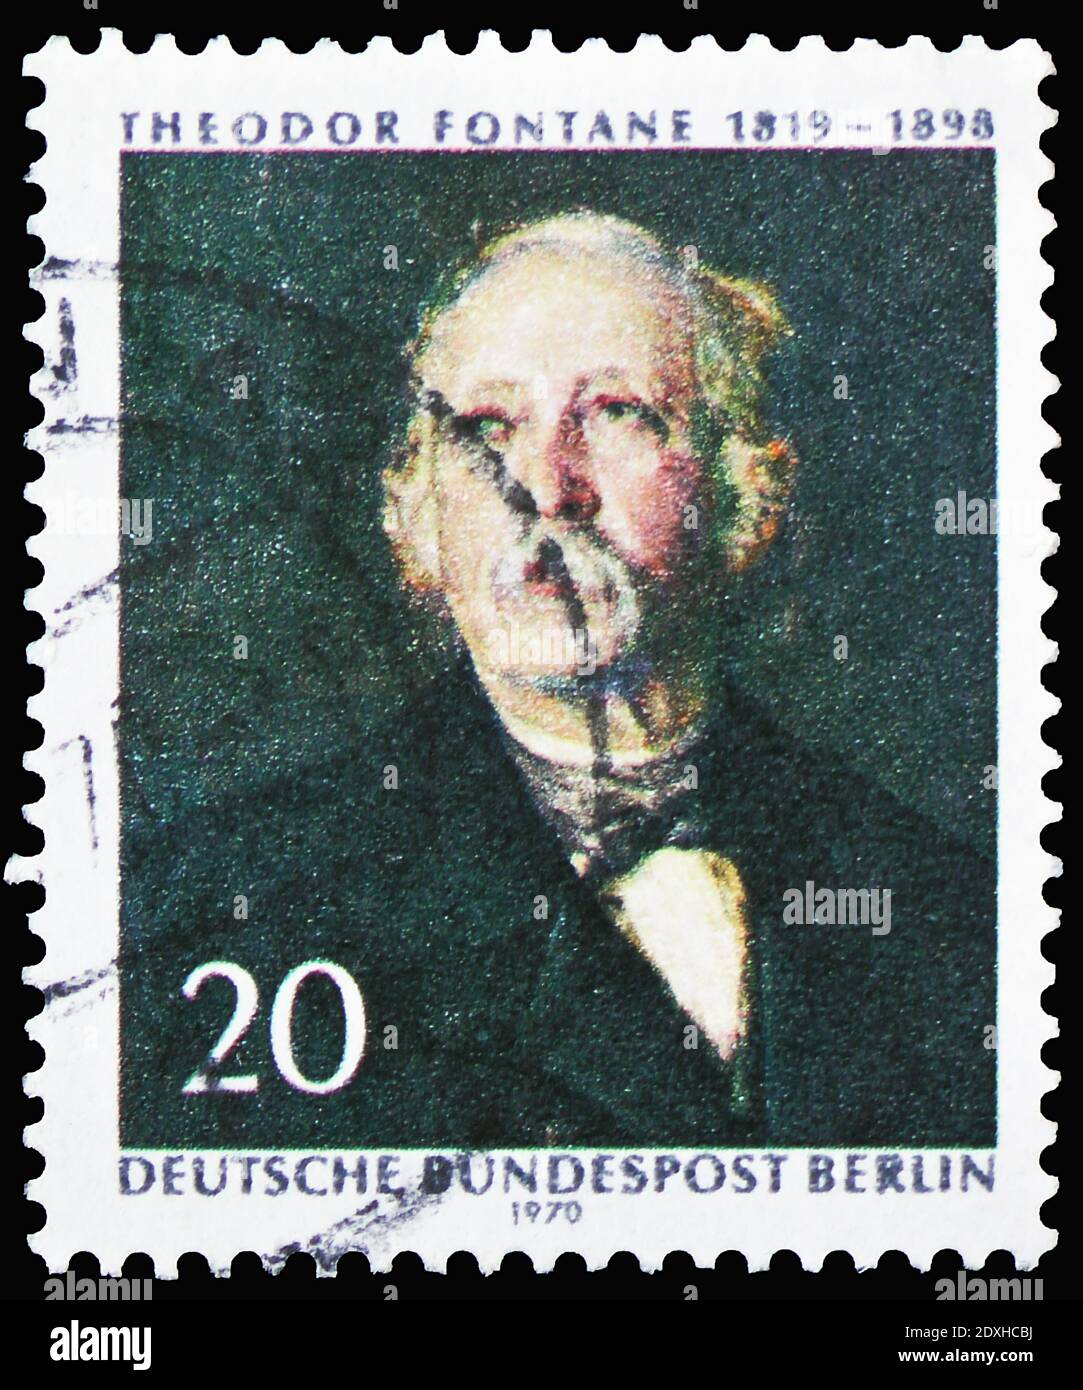 MOSCOW, RUSSIA - MARCH 30, 2019: A stamp printed in Germany, Berlin, shows Theodor Fontane (1819-1898), 150th birthday of Theodor Fontane serie, circa Stock Photo